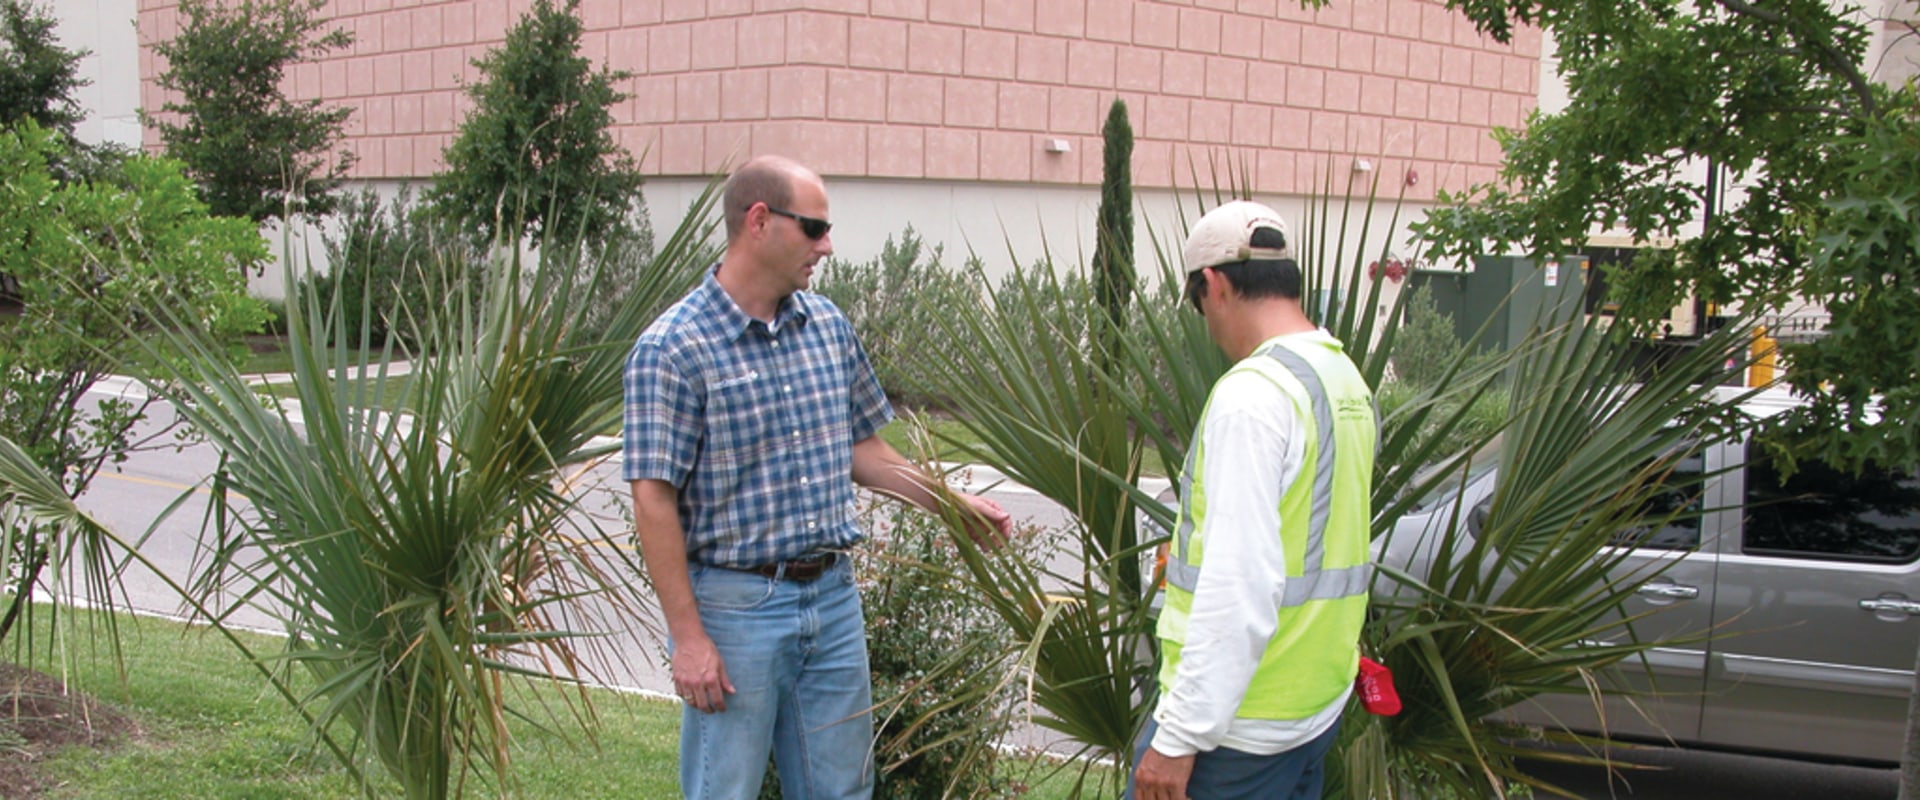 What are the daily duties for a landscaper?